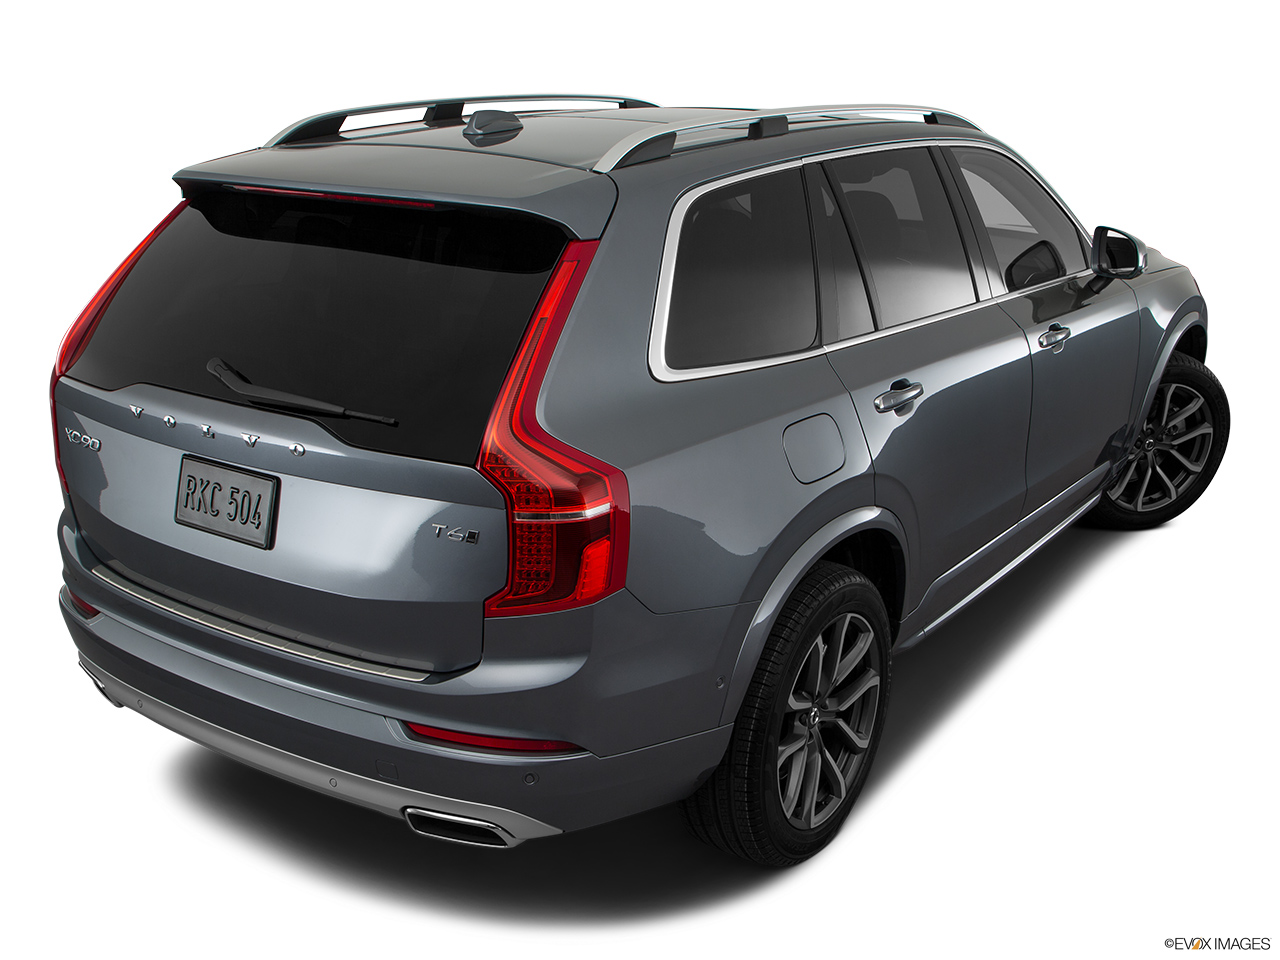 2017 Volvo XC90 T6 Momentum Rear 3/4 angle view. 